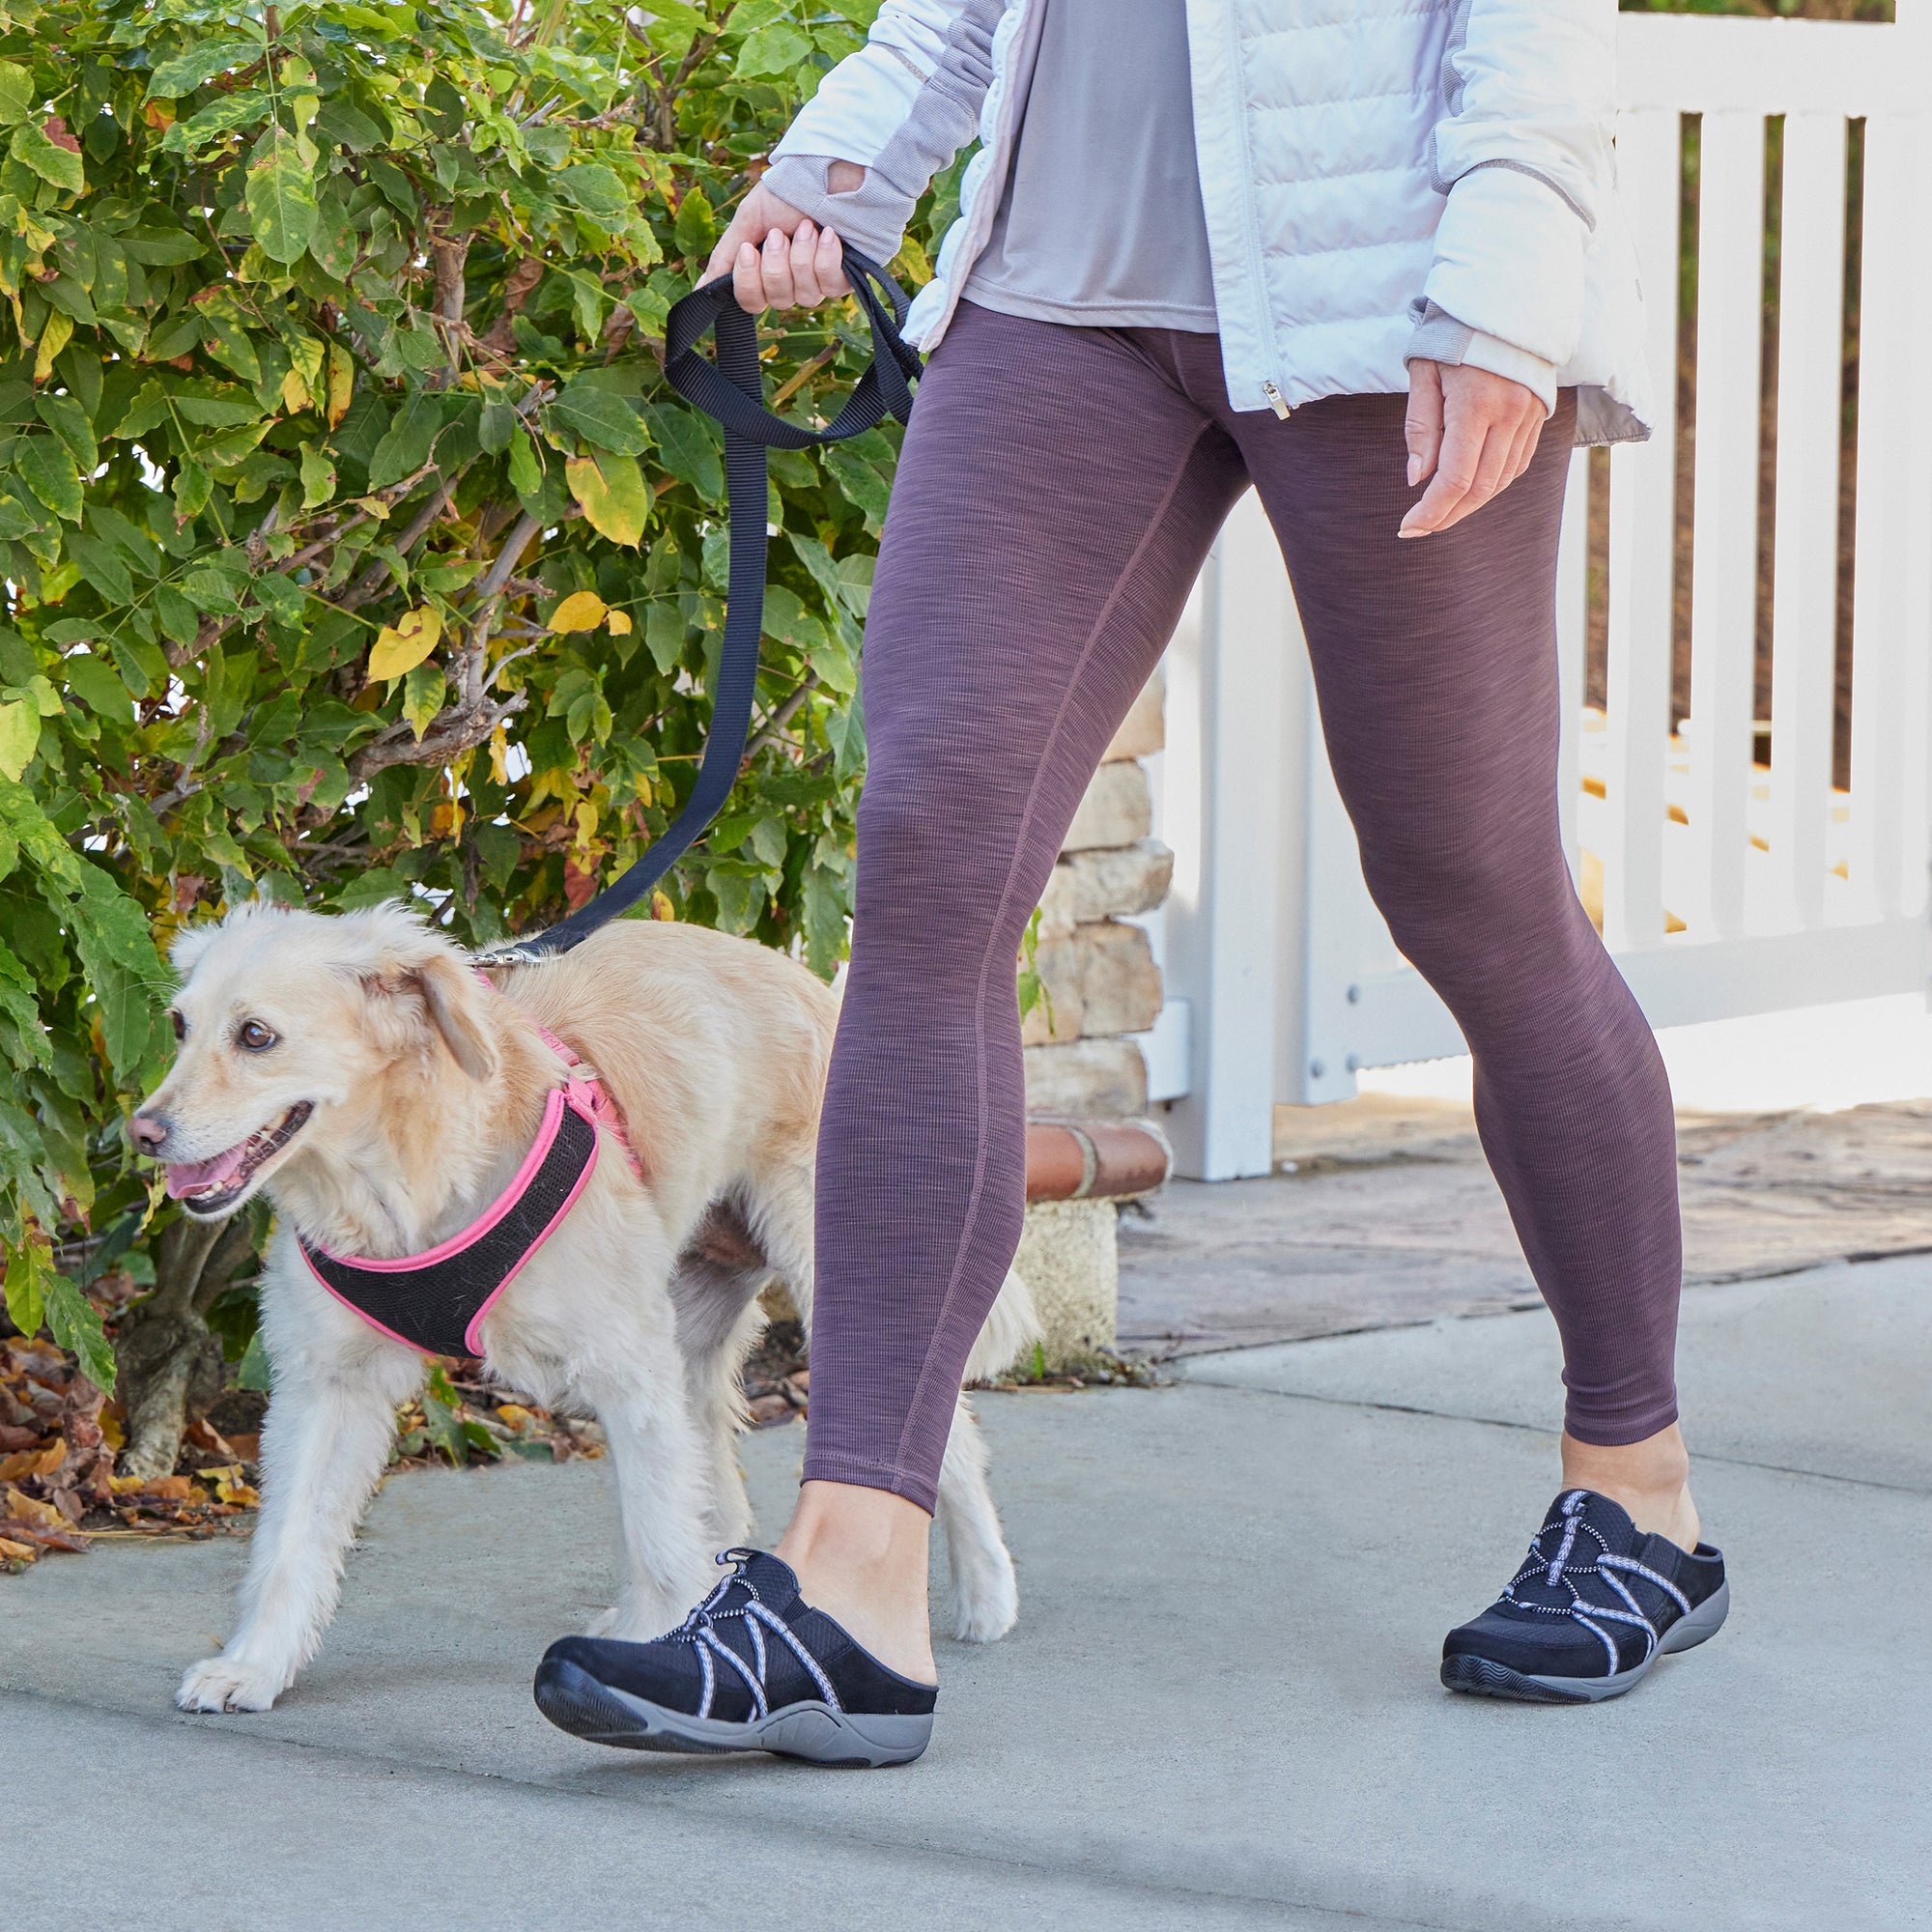 A woman wearing backless black sneakers and leggings while walking a dog.